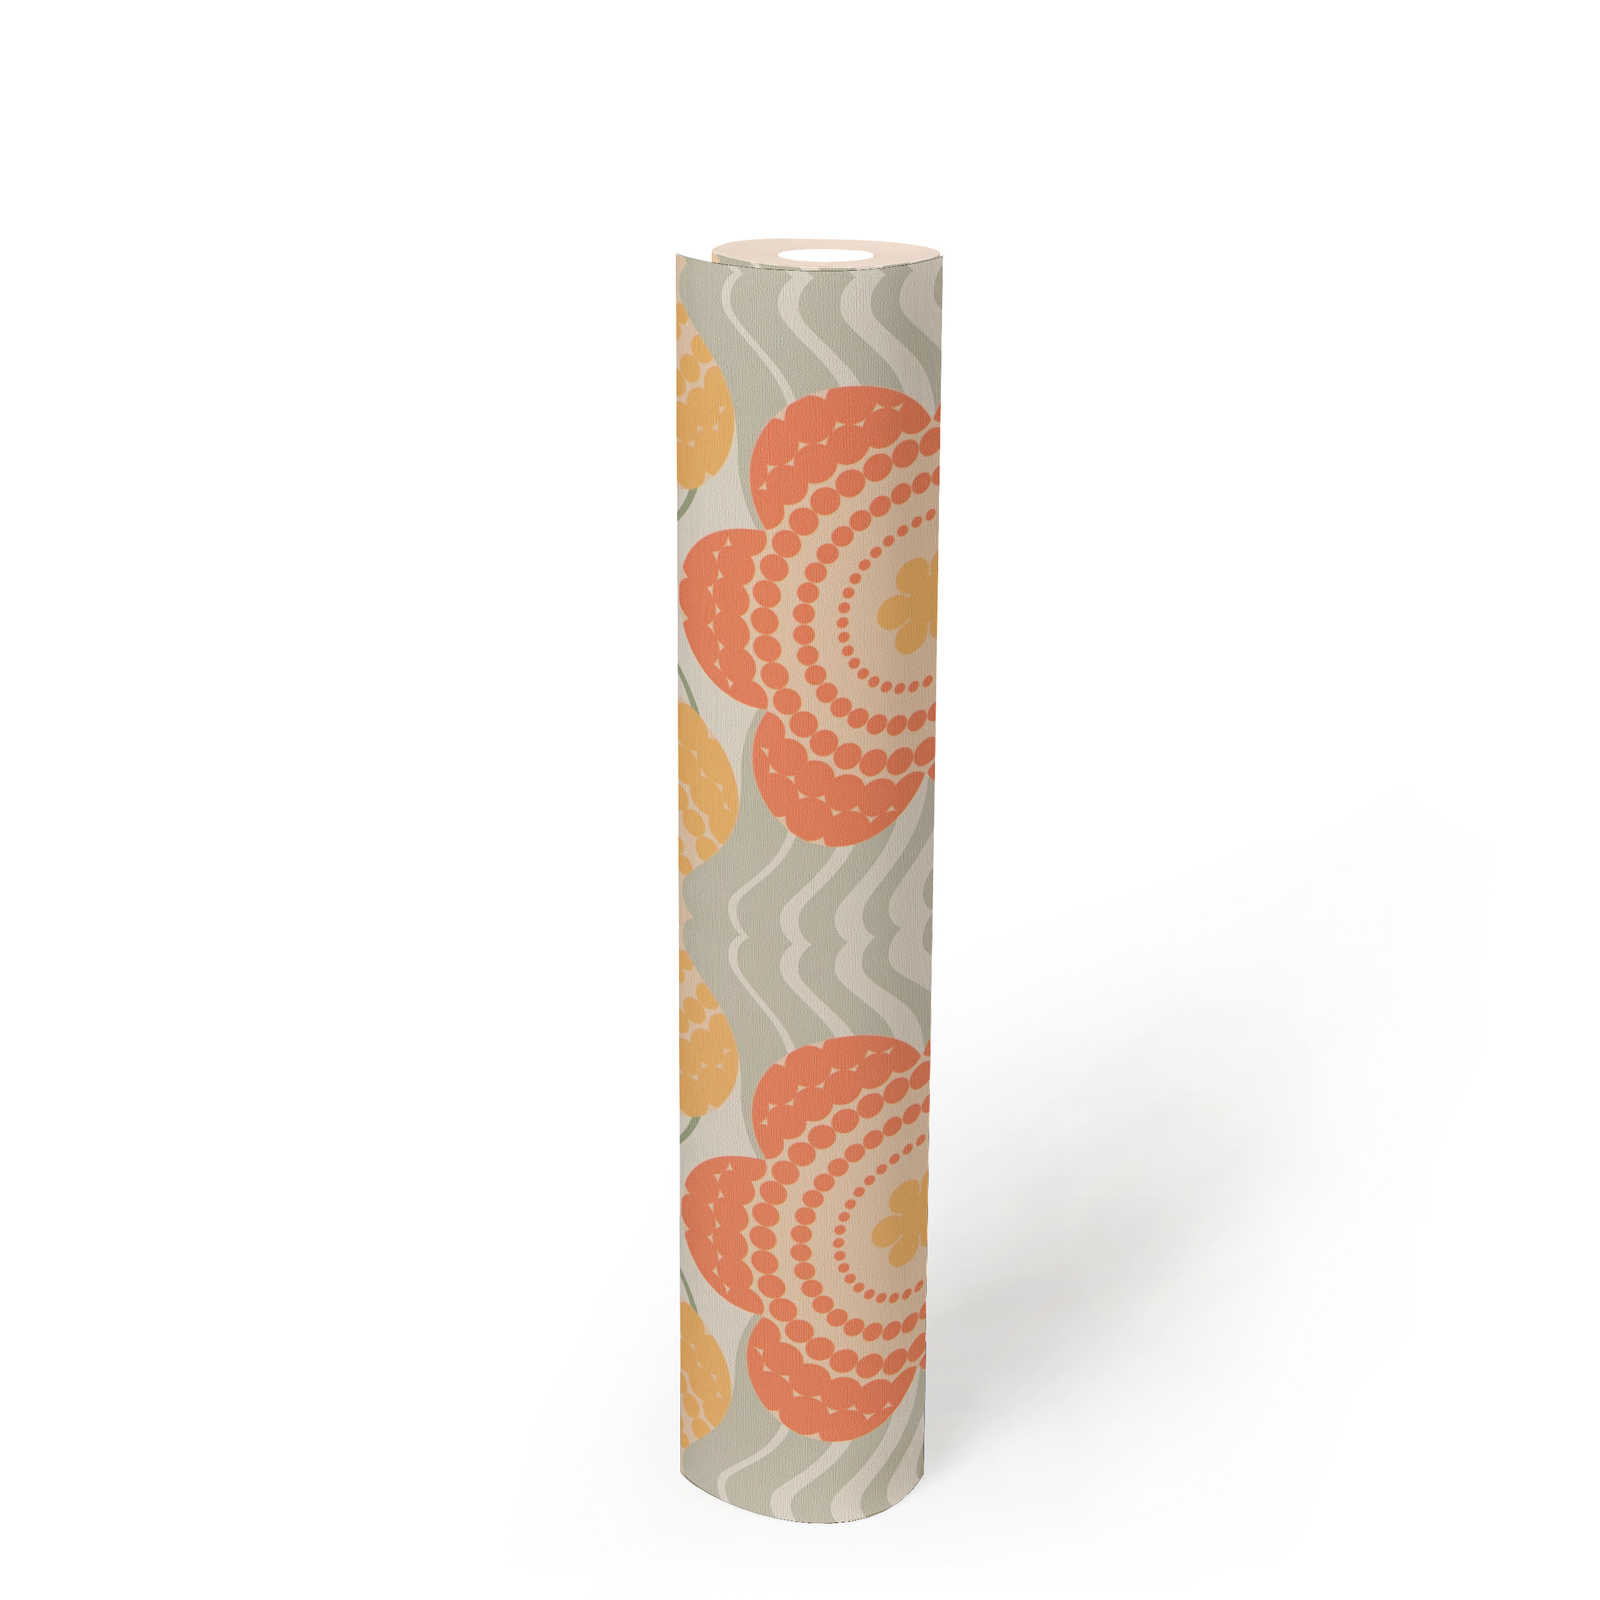             Retro non-woven wallpaper with waves and flowers pattern - orange, yellow, green
        